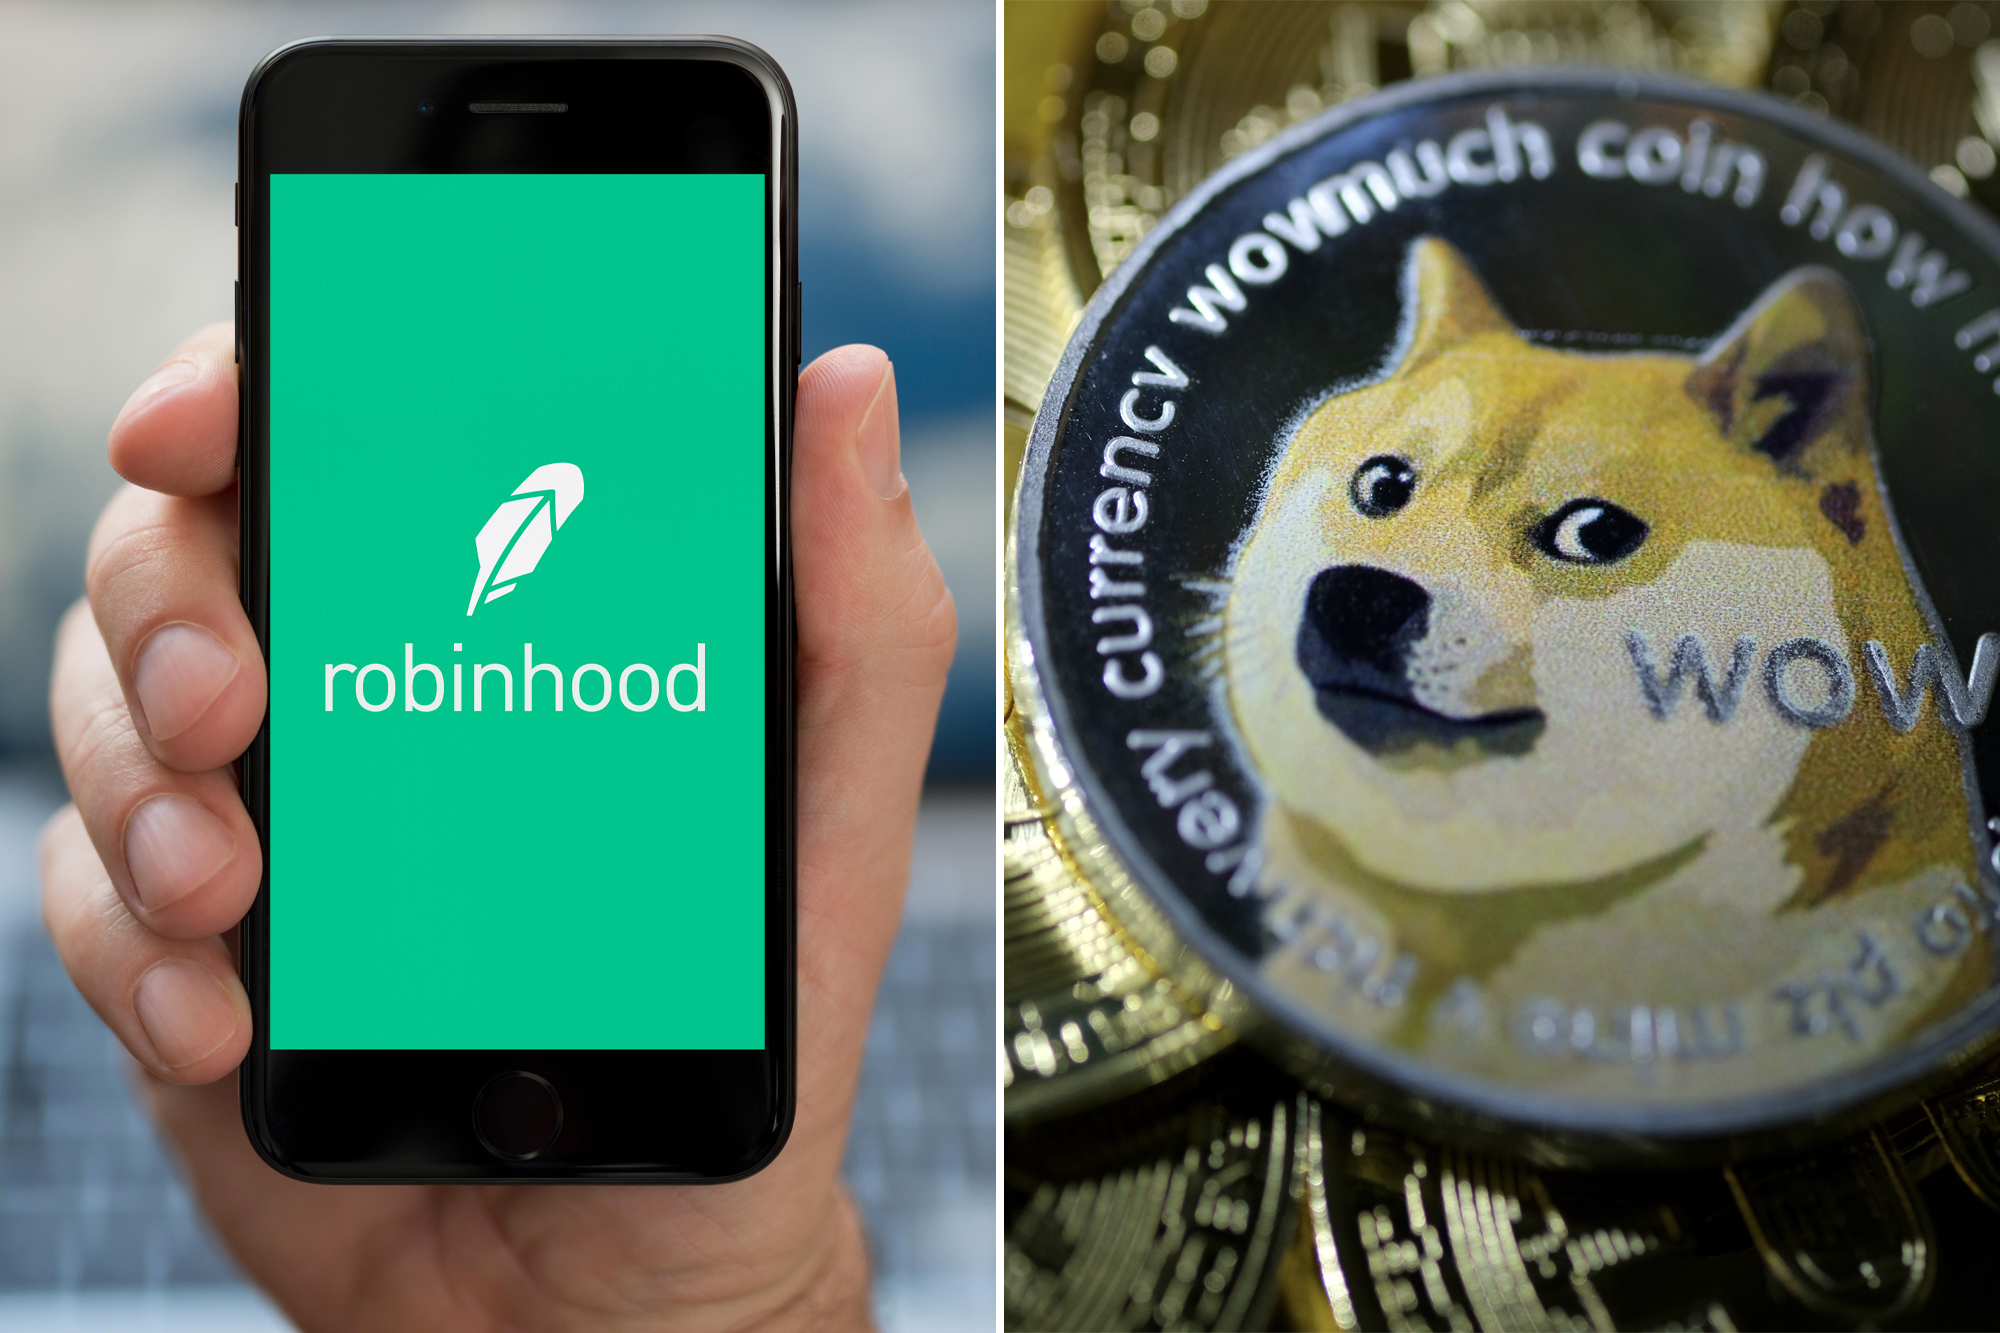 Robinhood restricts crypto trading as Dogecoin soars percent - The Verge